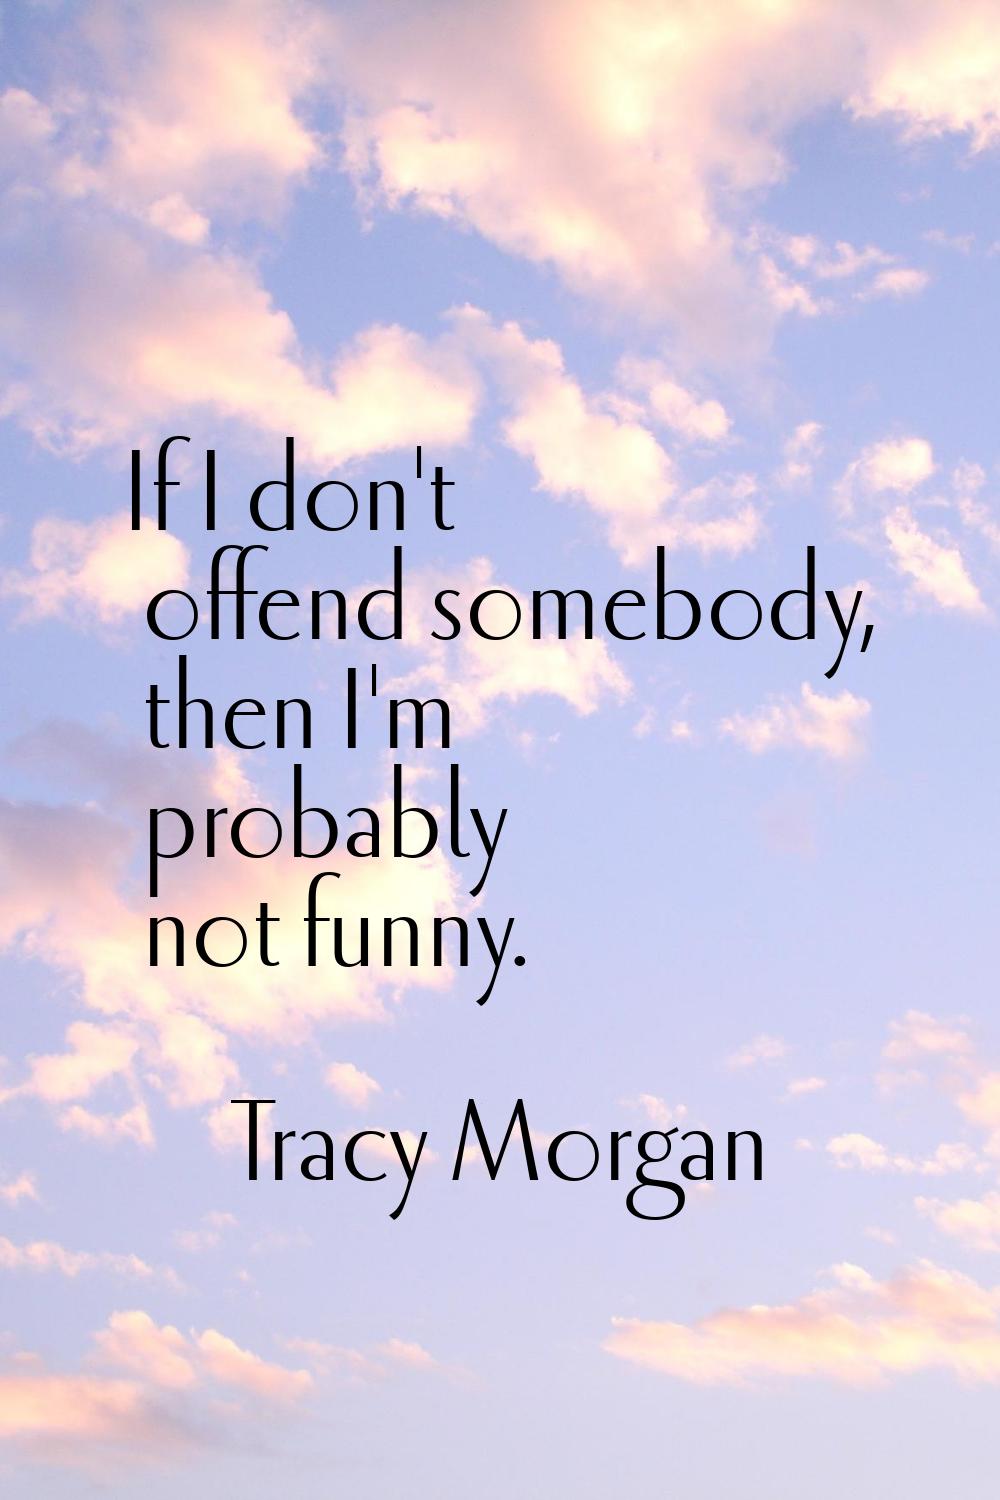 If I don't offend somebody, then I'm probably not funny.